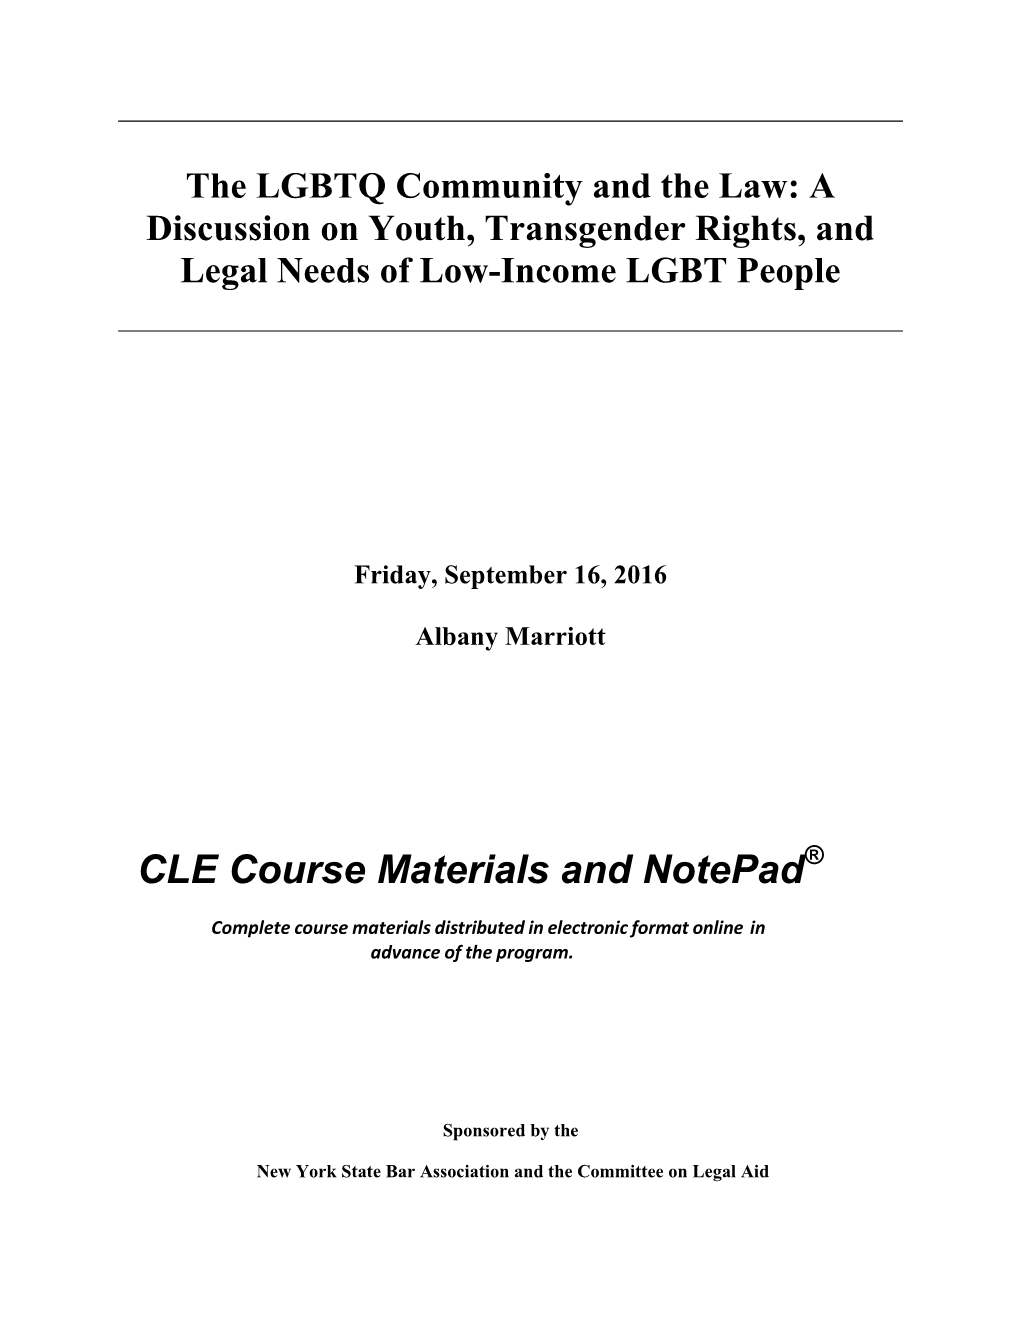 CLE Course Materials and Notepad